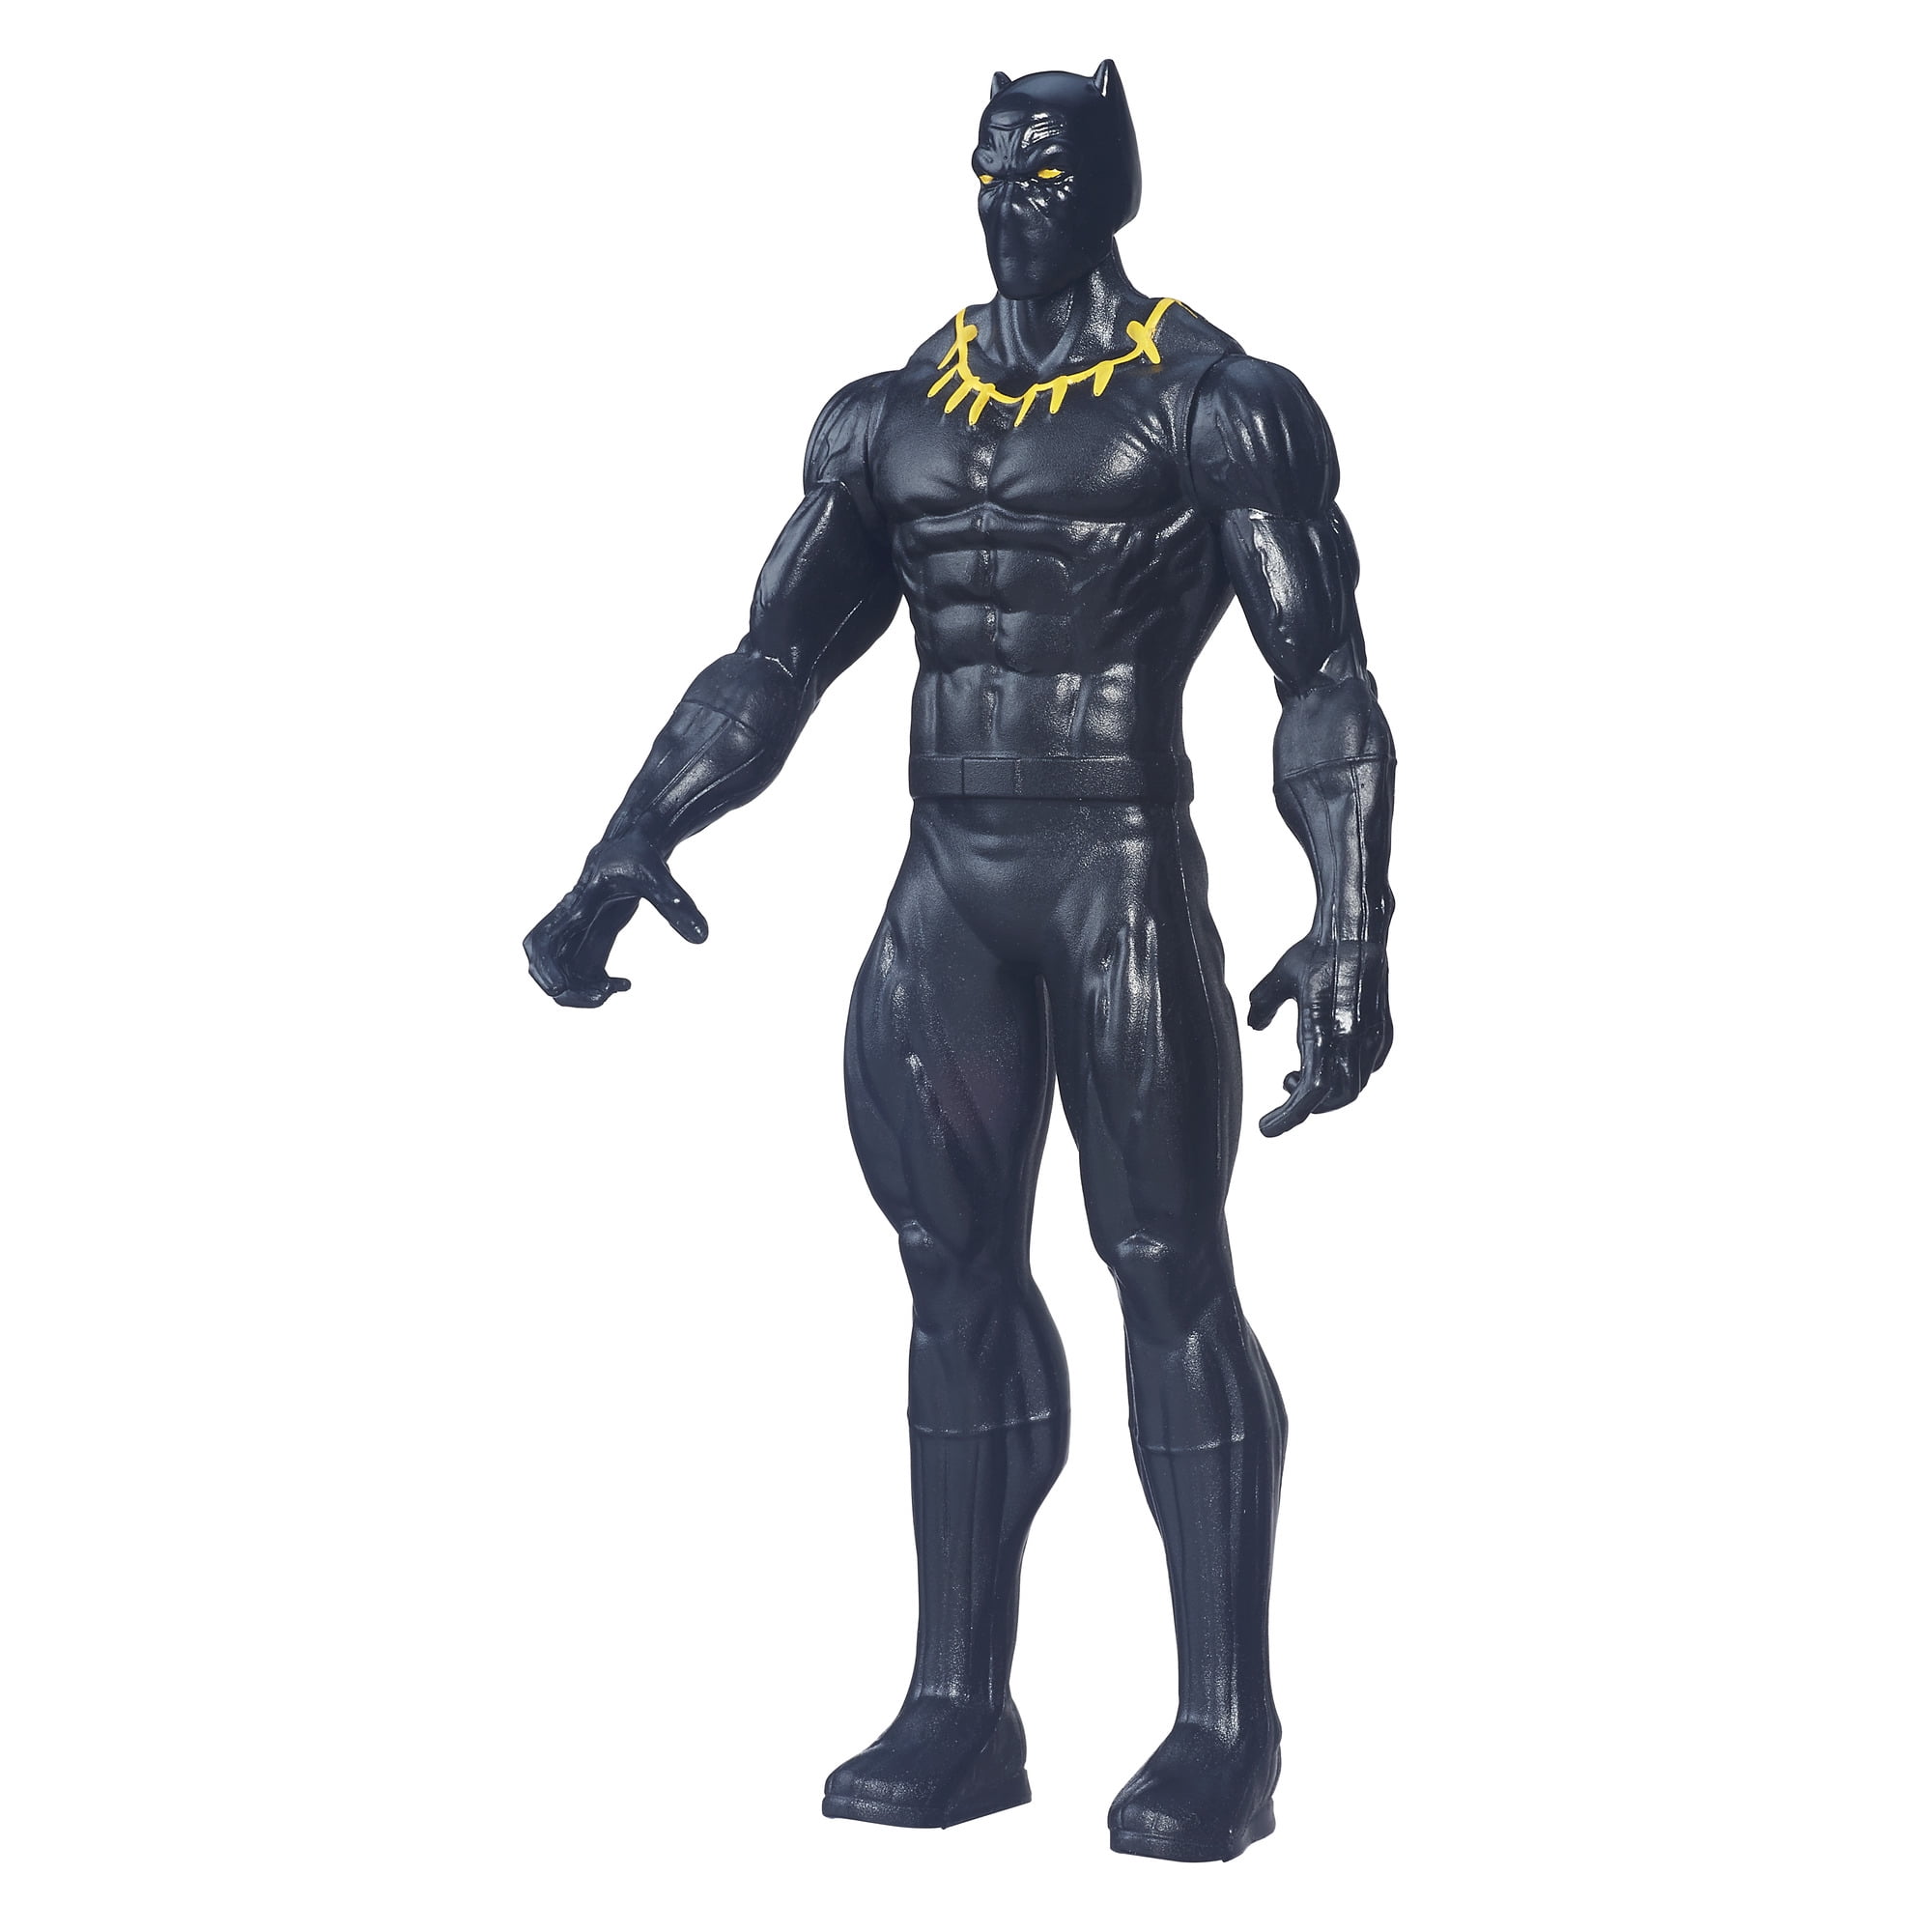 Marvel X-Men Avengers Hero Black Panther Statue Figure 1/6 Collection Toy 